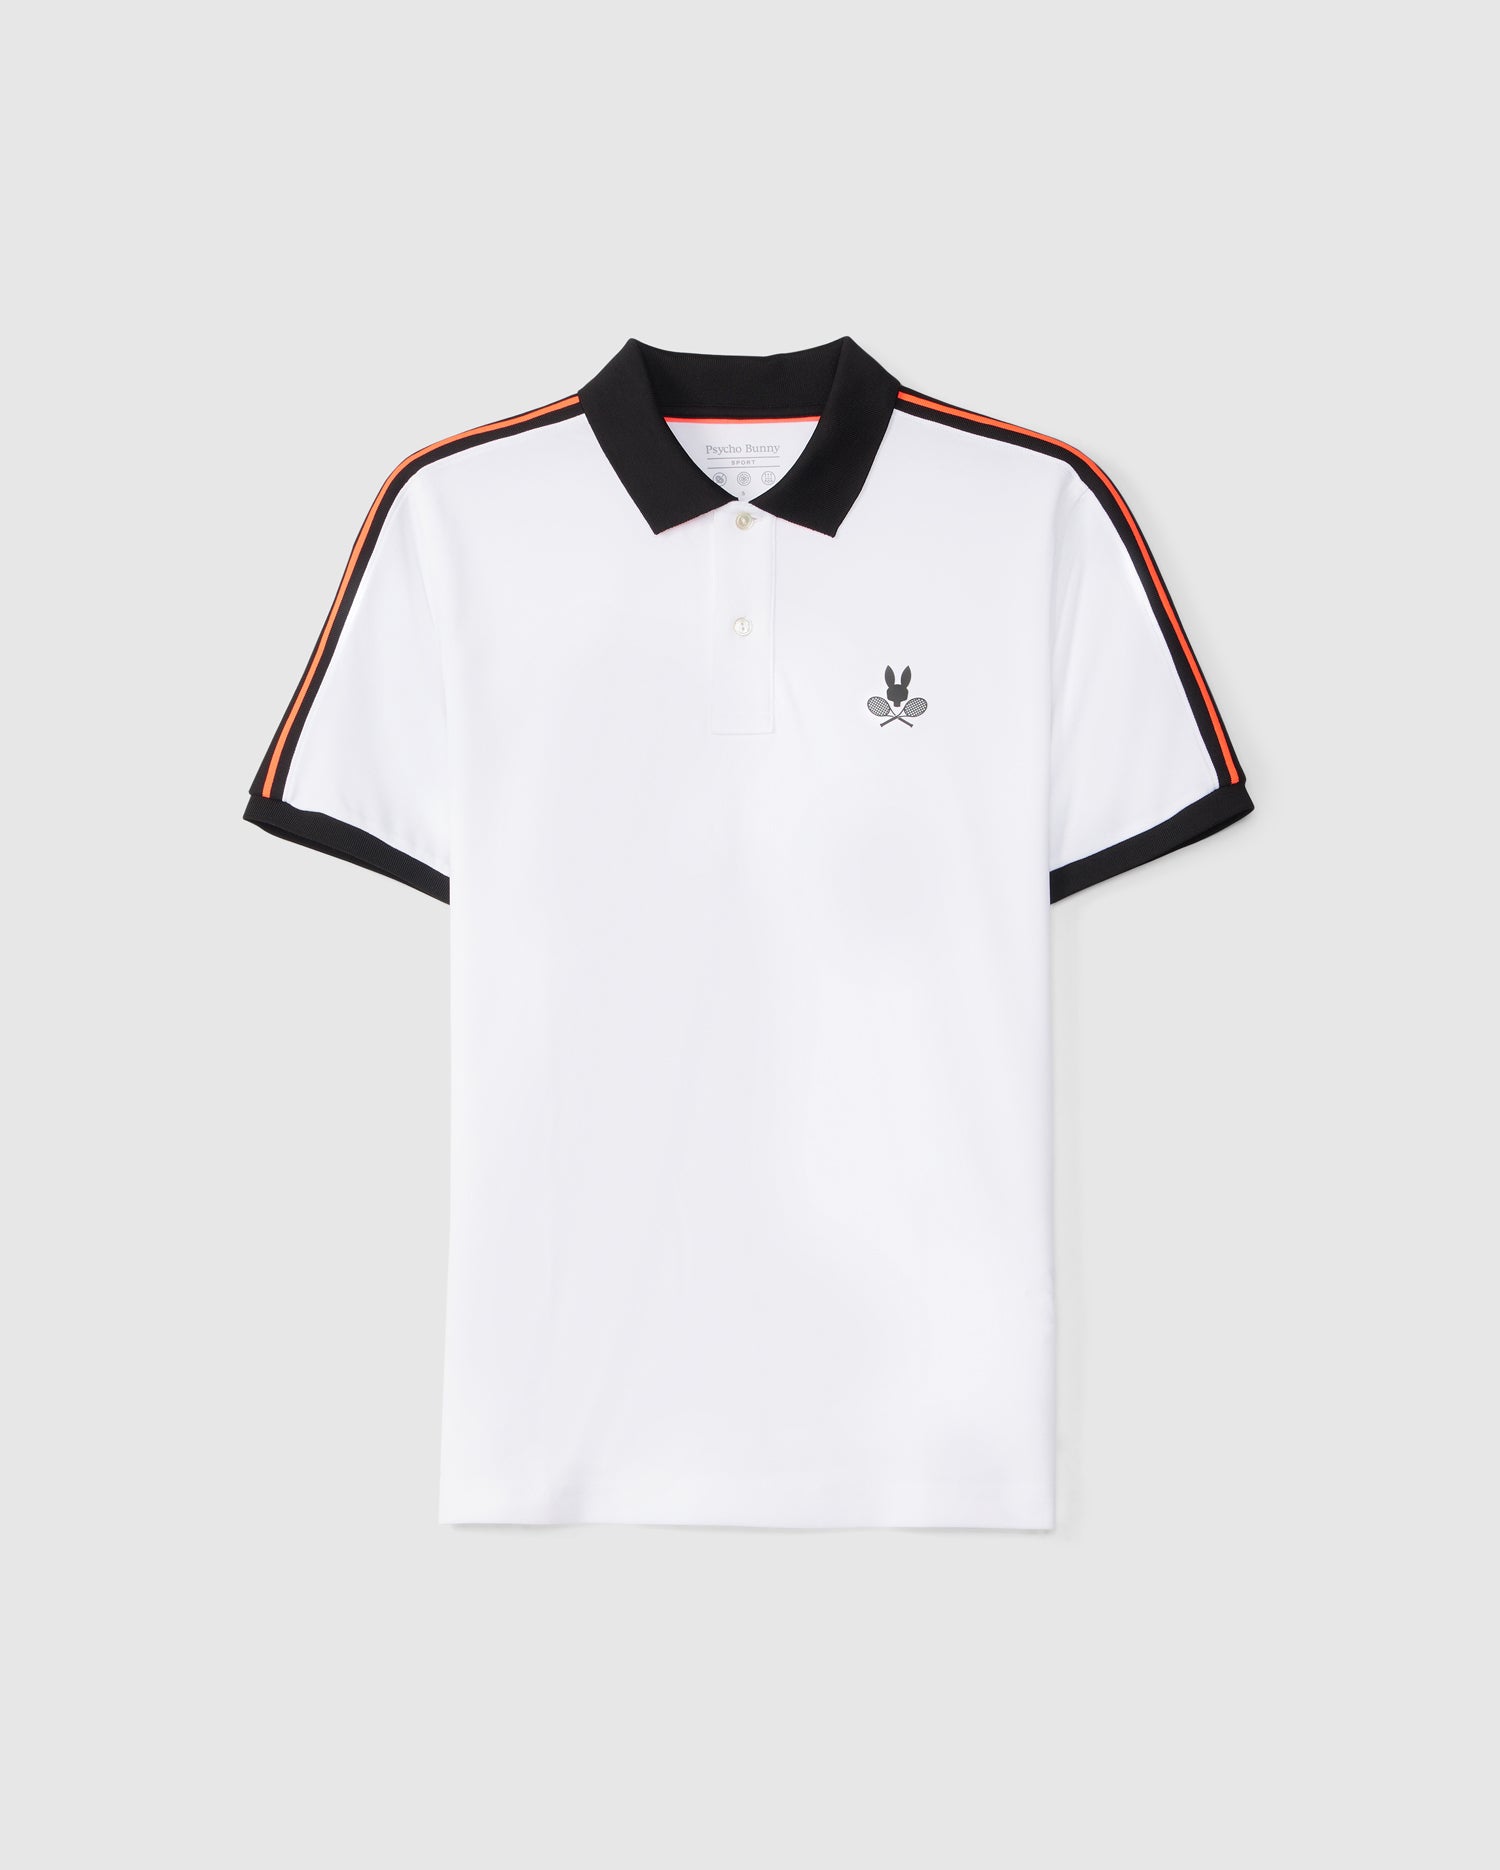 The Psycho Bunny MENS COURTSIDE SPORT POLO - B6K693C200 featuring a rib knit collar and black sleeve cuffs. The shirt is accented with orange and black stripes along the shoulders and sleeves. An embroidered Bunny logo of a small black bunny with crossing tennis rackets adorns the left chest.